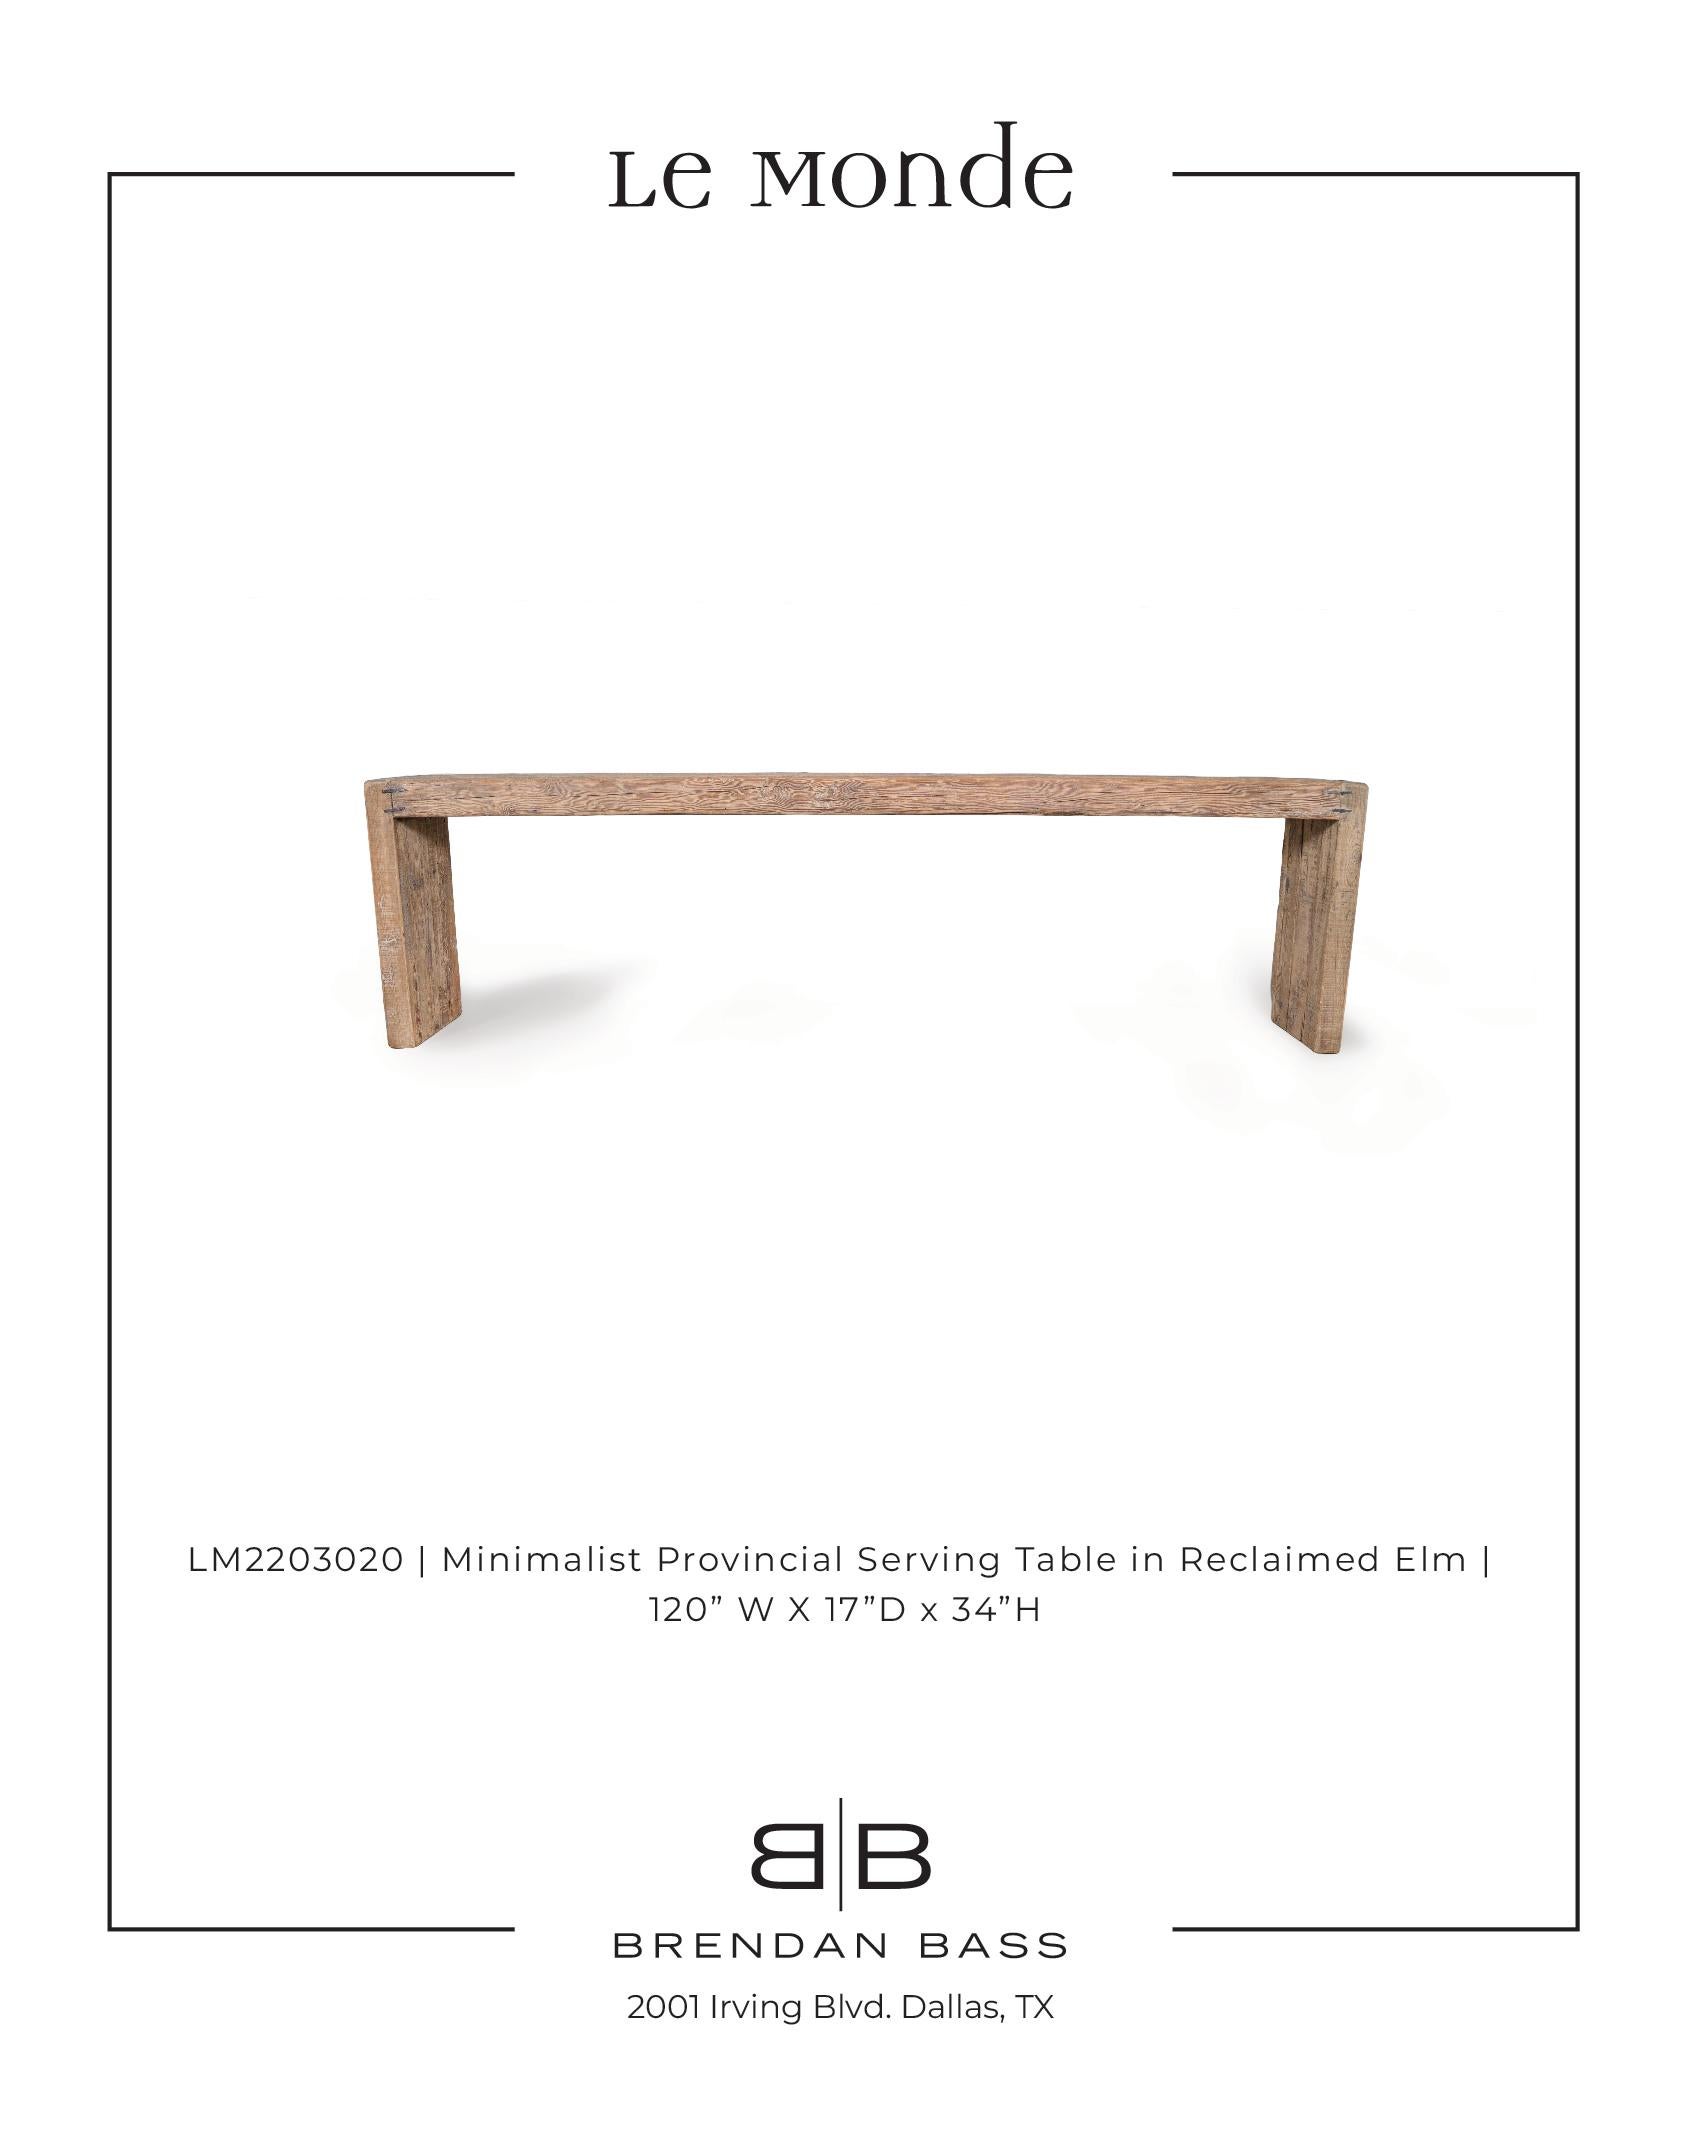 20th Century Minimalist Provincial Serving Table in Reclaimed Elm